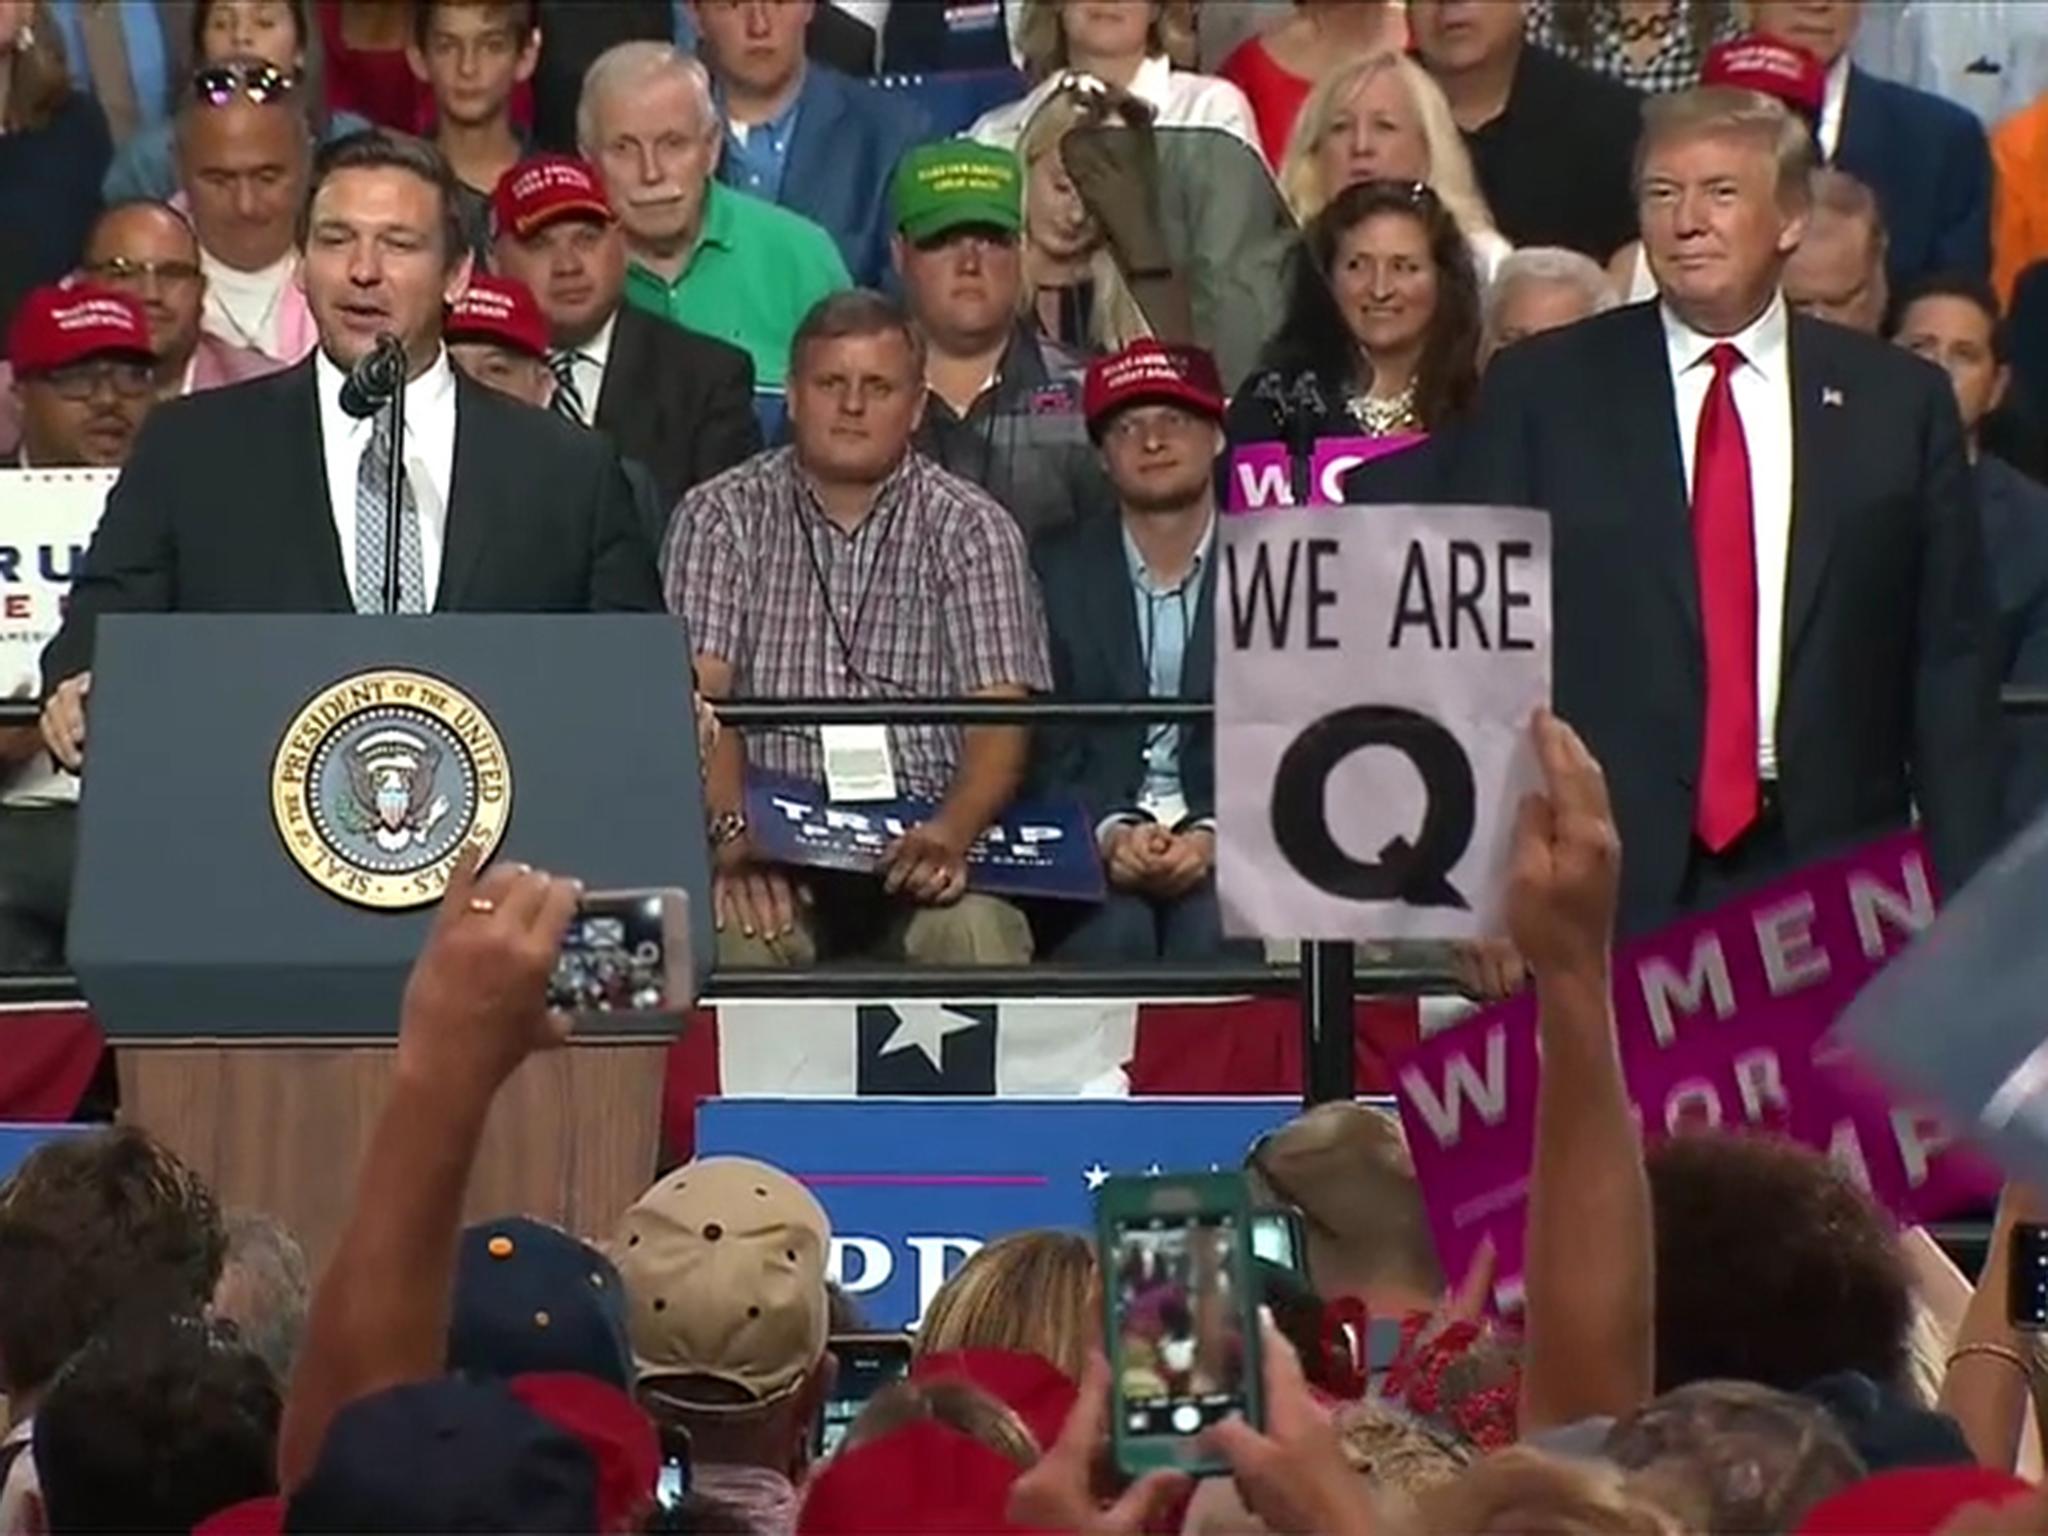 Mr Trump's supporters have embraced conspiracy theories like QAnon which suggest that there is an establishment plot against the president